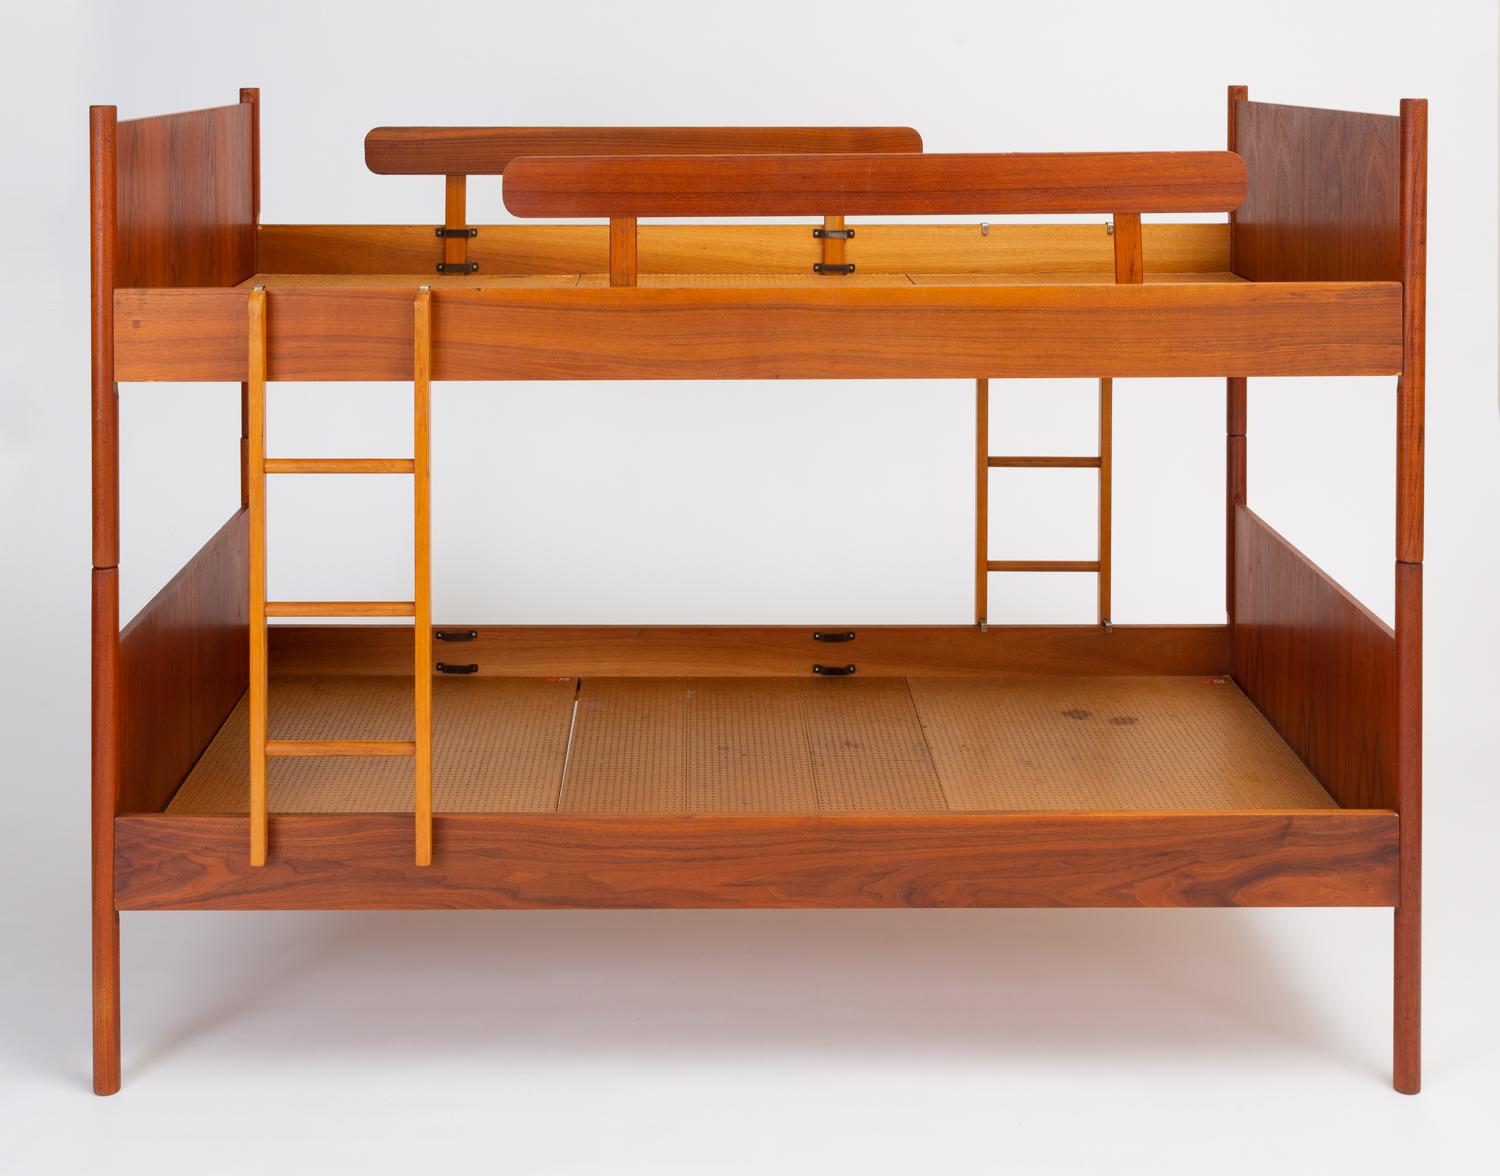 This set of Norwegian twin-size bunk beds has teak head- and foot-boards, dowel legs, side rails, and attached nightstands with a shelf and rounded corners. A small ladder fits to the rails of each side of the stacked beds for access to the top